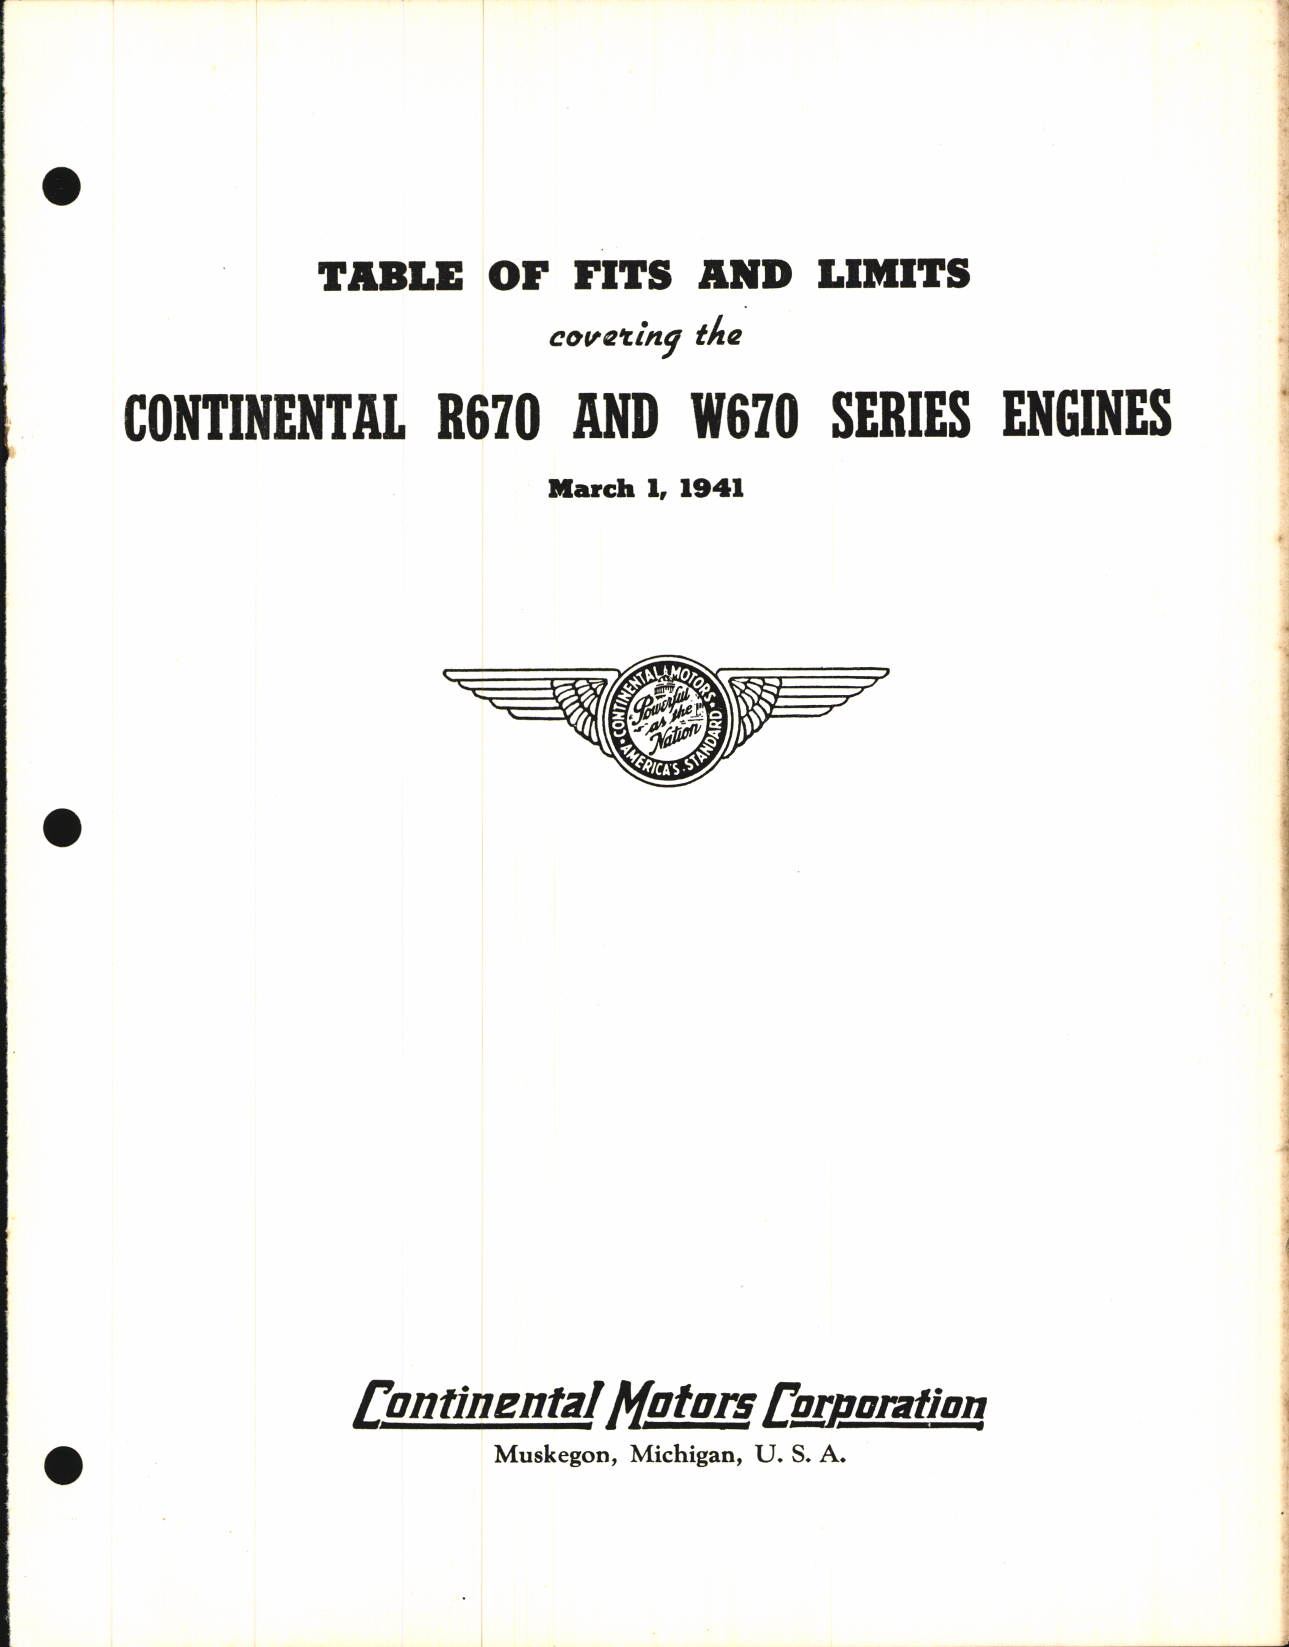 Sample page 1 from AirCorps Library document: Table of Fits and Limits for Continental R670 and W670 Series Engines